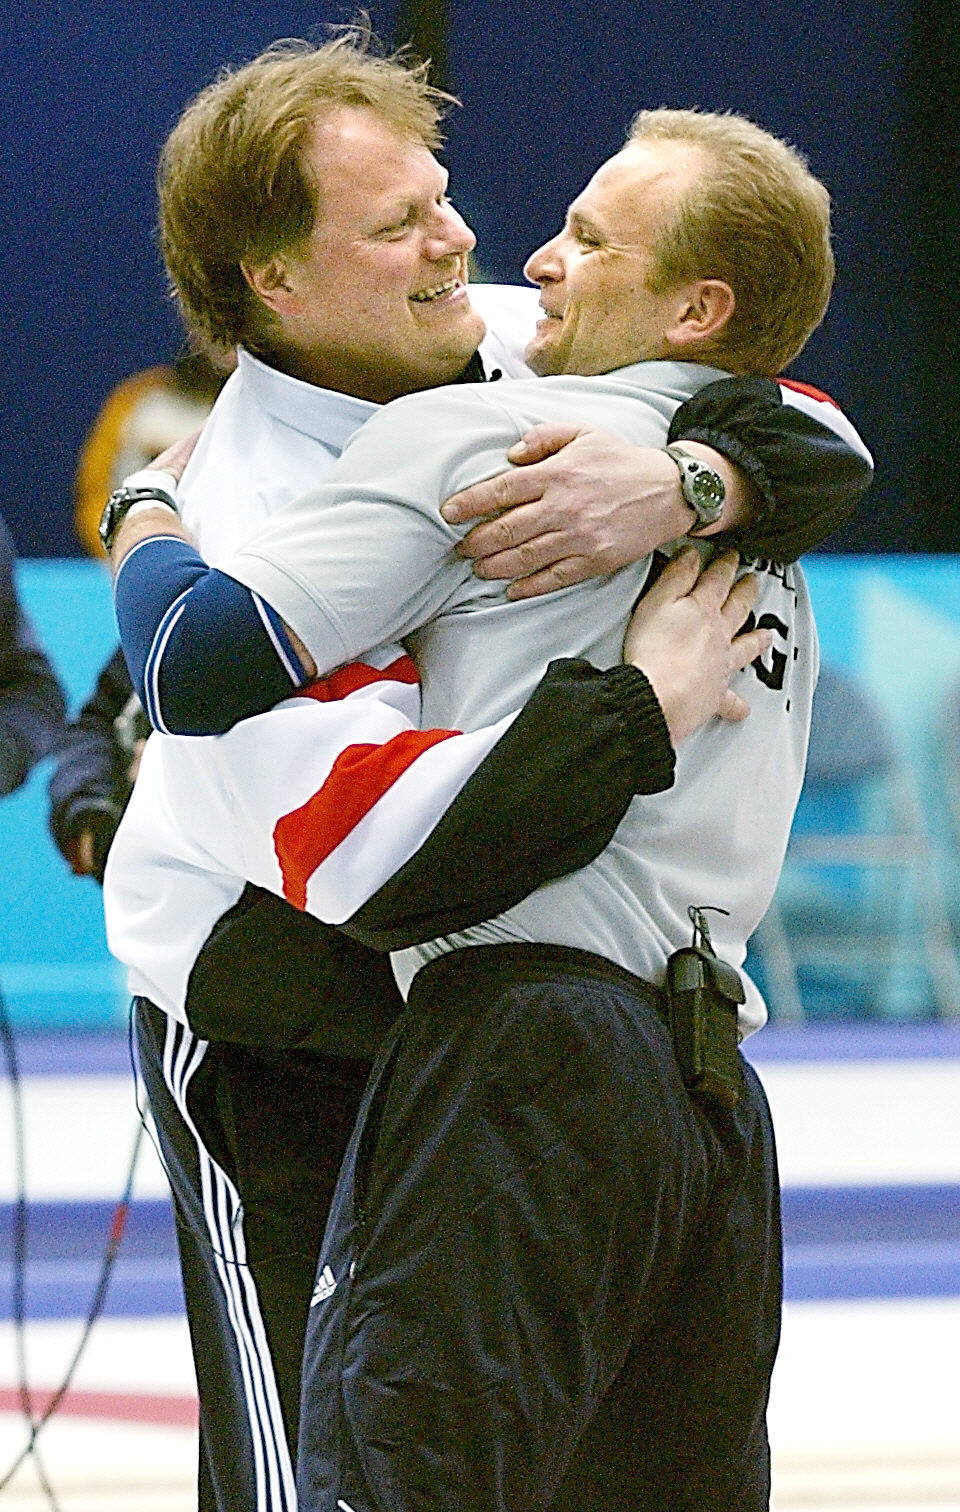 Bent Ånund Ramsfjell, right, won men's team curling Olympic gold with Norway at Salt Lake City 2002 ©Getty Images